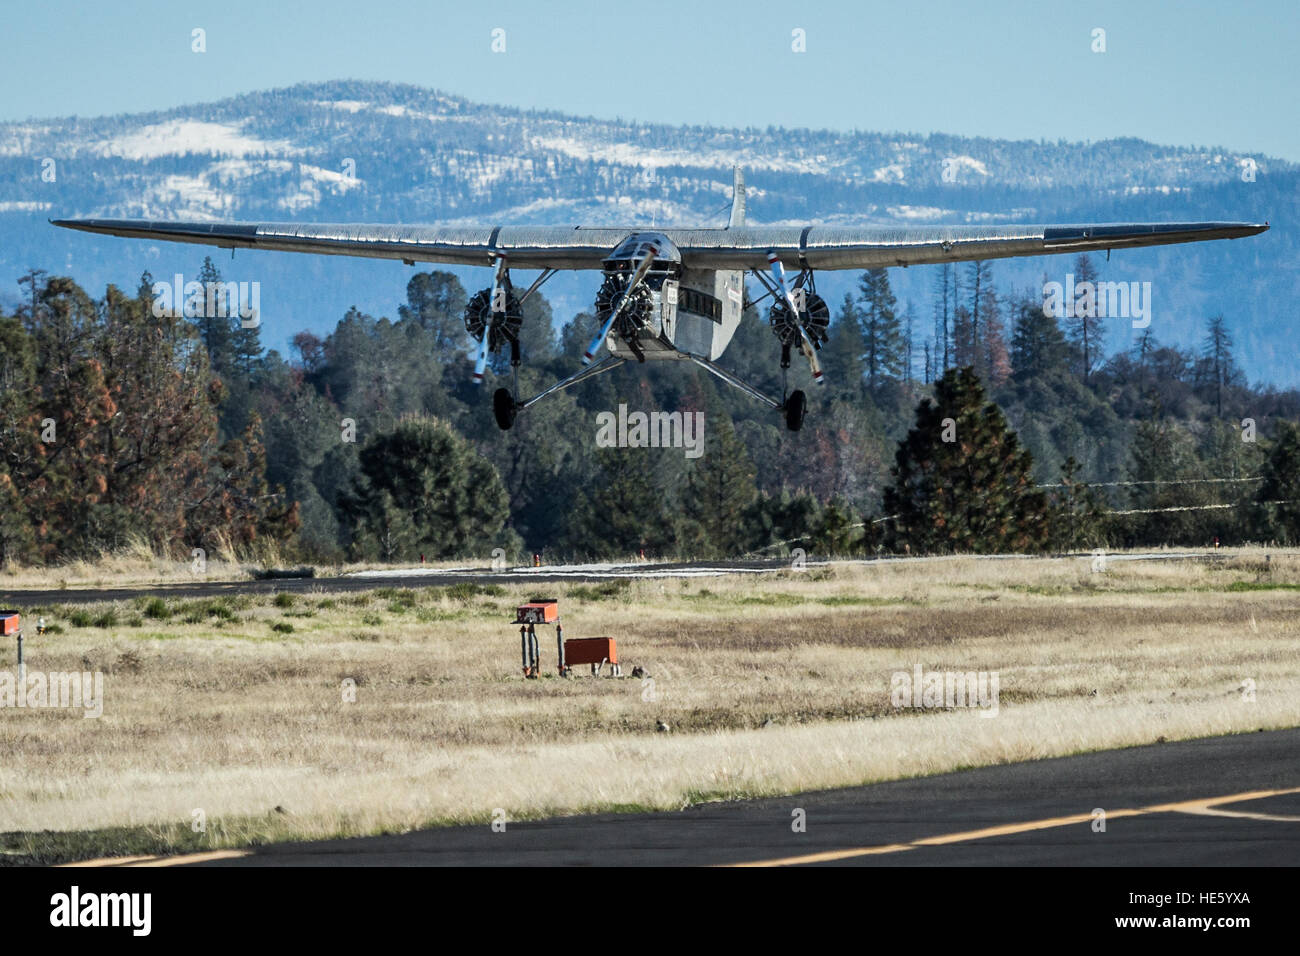 Groveland, California, USA. 17th Dec, 2016. Saturday, December 17, 2016.A 1928 Ford Tri-Motor airplane lands at the Pine Mountain Lake Airport in Groveland, California. This Ford Tri-Motor NC9645, nicknamed The Tin Goose, has a wingspan of 77 feet 6 inches and was constructed in 1928. It was named the City of Wichita, and it was used to introduce the first coast-to-coast passenger air/rail service in the United States on July 7, 1929, and the development and inauguration of the first all air passenger service on October 25, 1930. The plane can carry up to 10 passengers.Experimental Ai Stock Photo